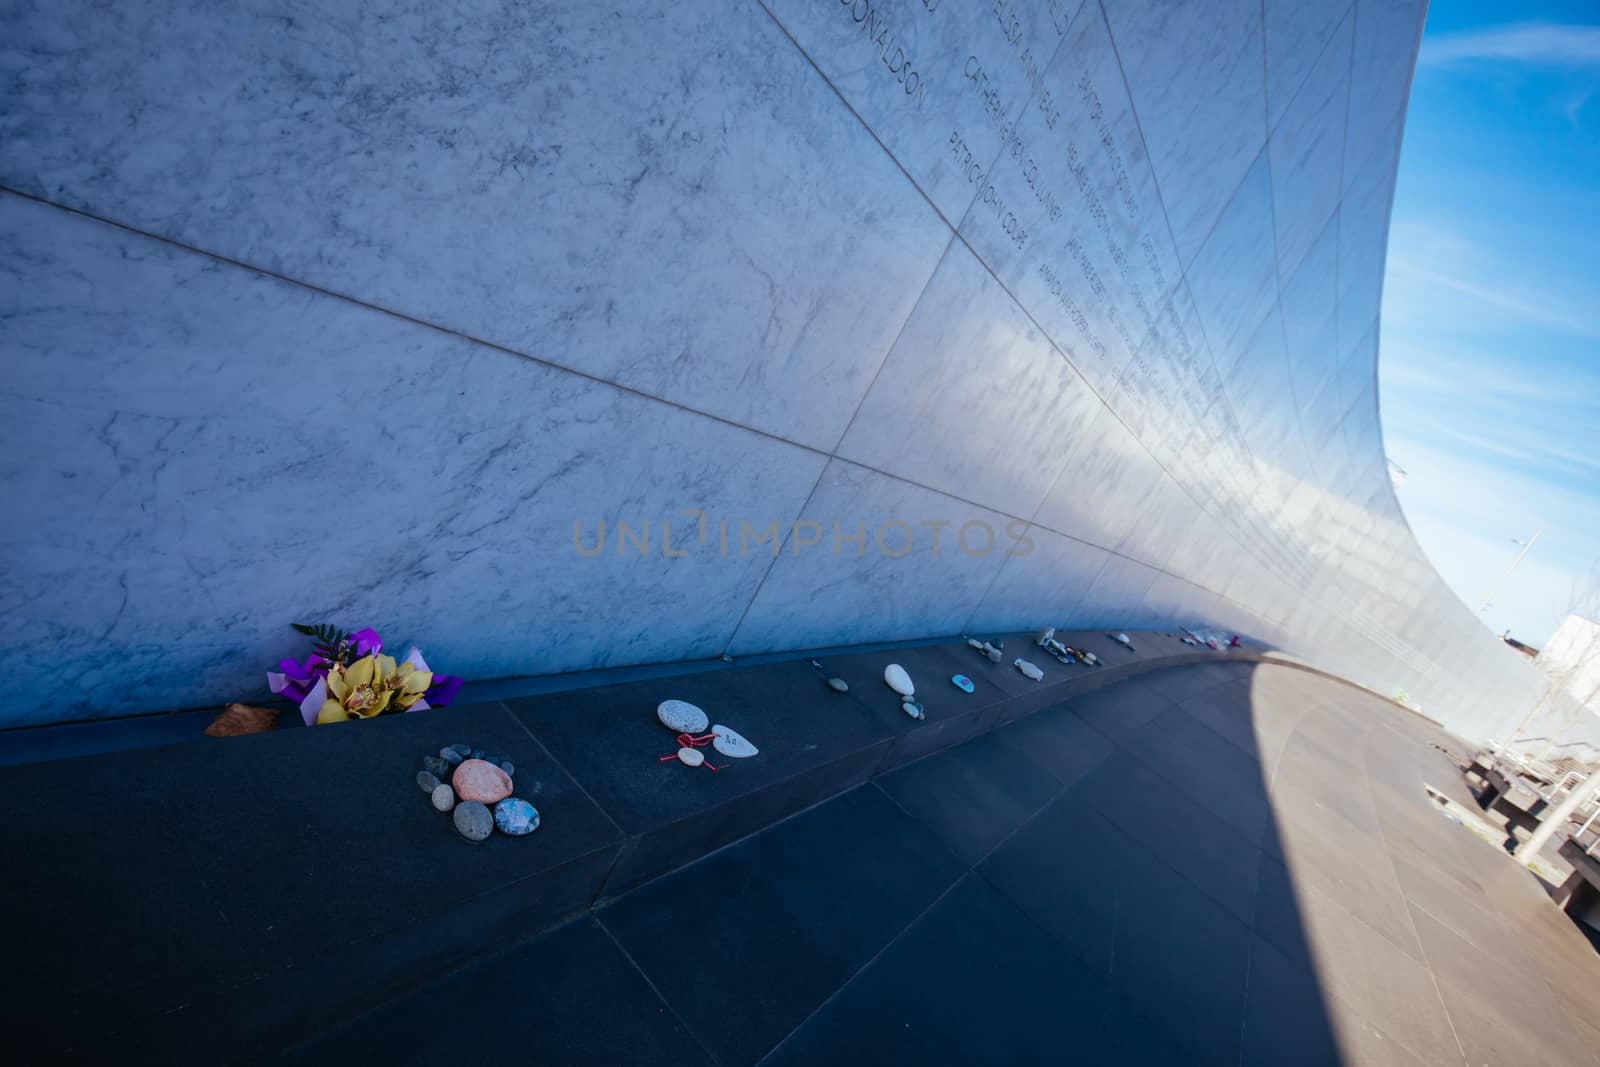 Earthquake Memorial Christchurch New Zealand by FiledIMAGE